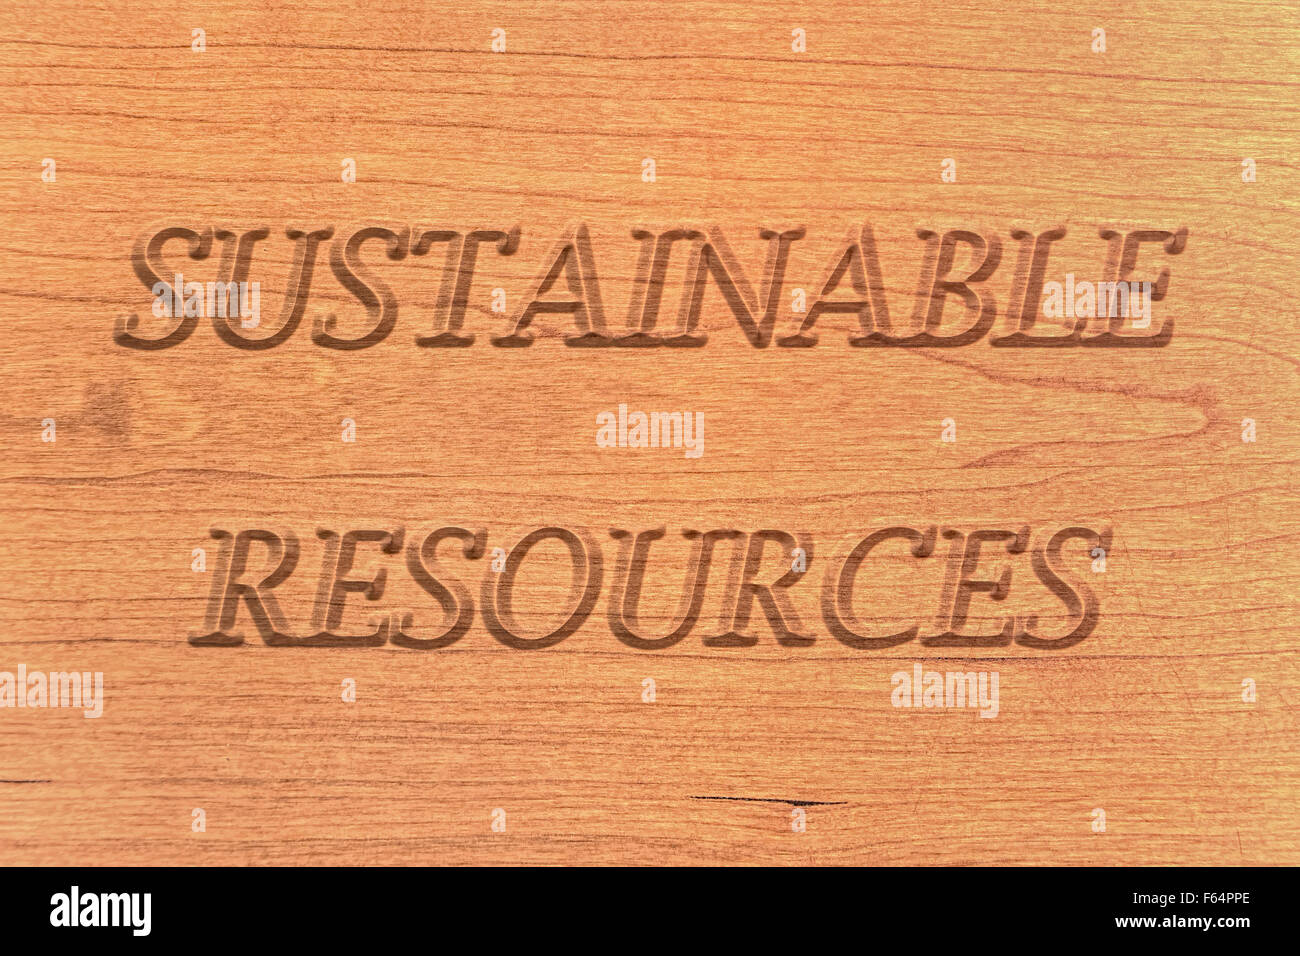 Sustainable resources, wooden natural sign or emblem, background. Stock Photo